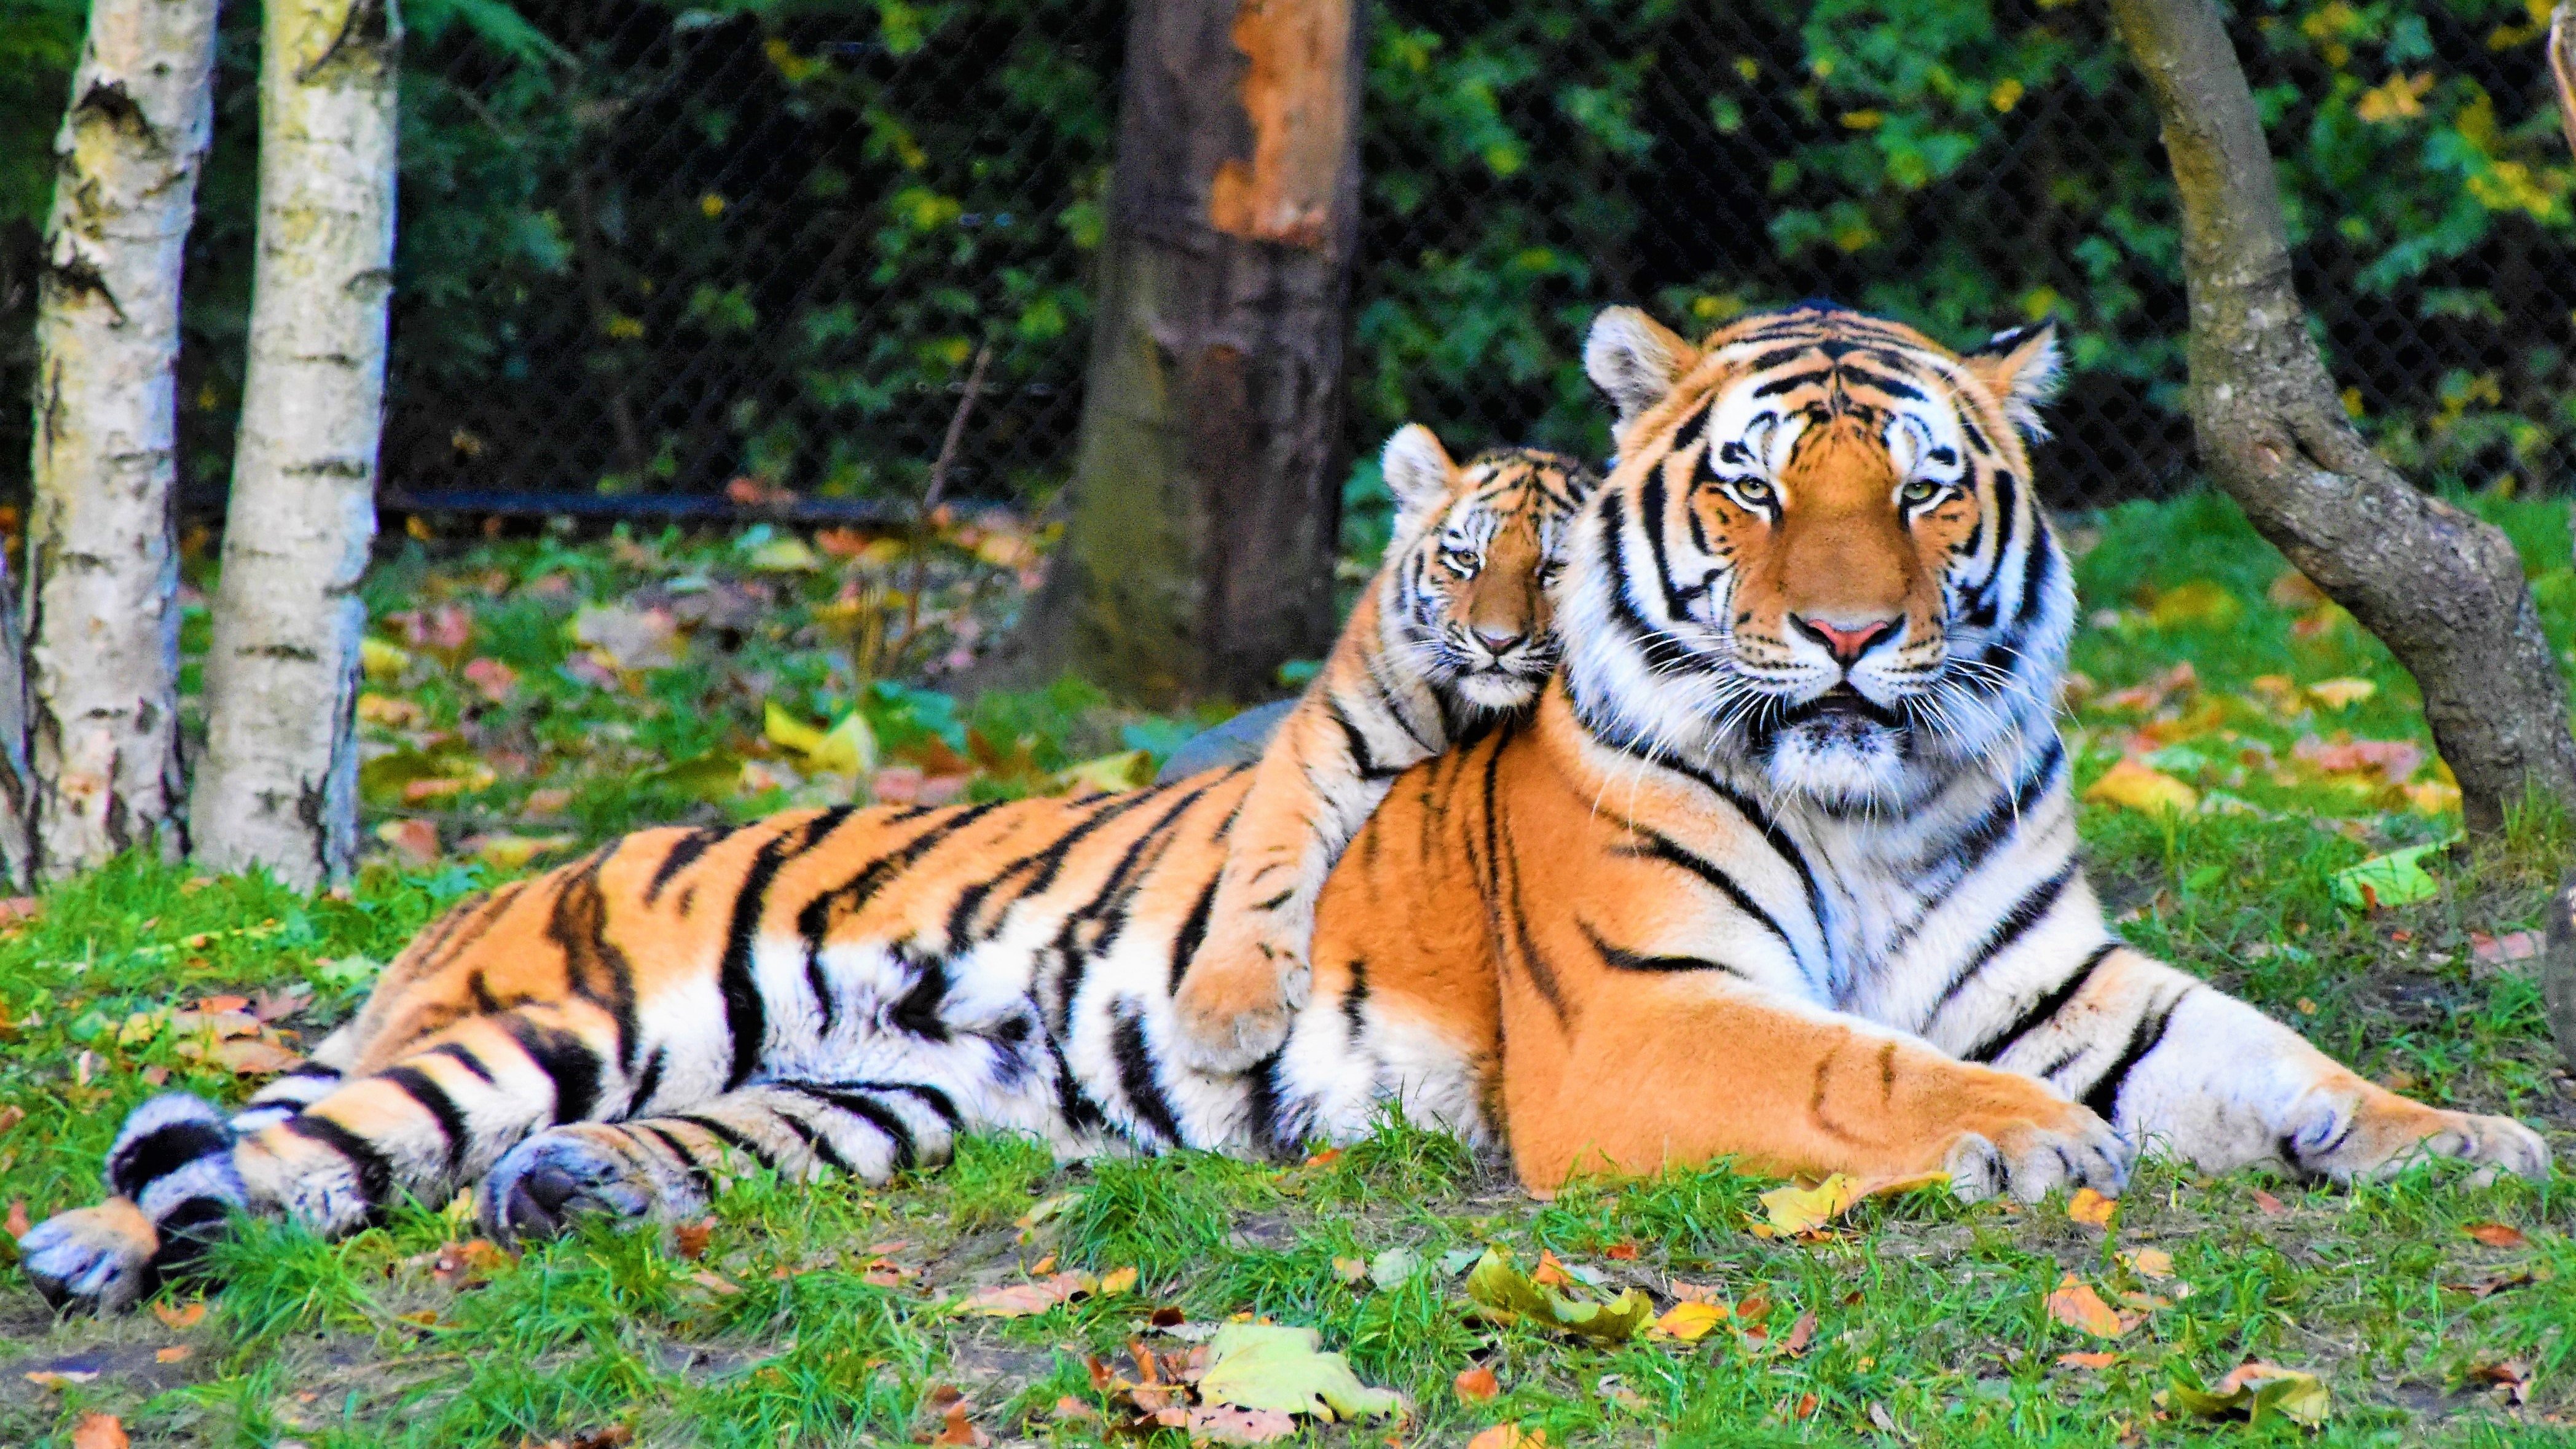 Picture of tigers in a park | Photo: Pixabay